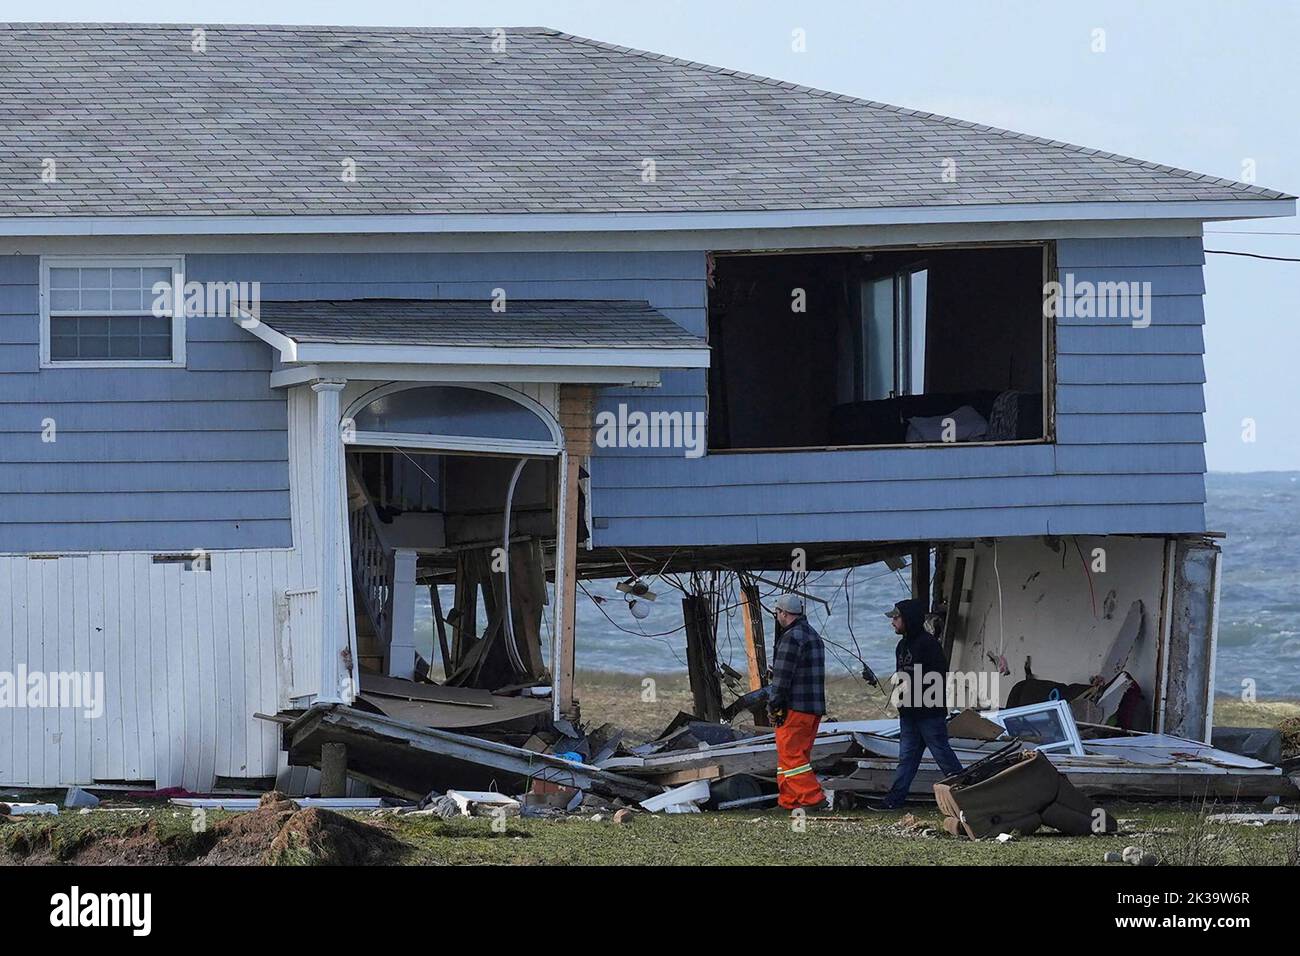 People examine a house after the arrival of Hurricane Fiona in Port Aux Basques, Newfoundland, Canada September 25, 2022. REUTERS/John Morris Stock Photo